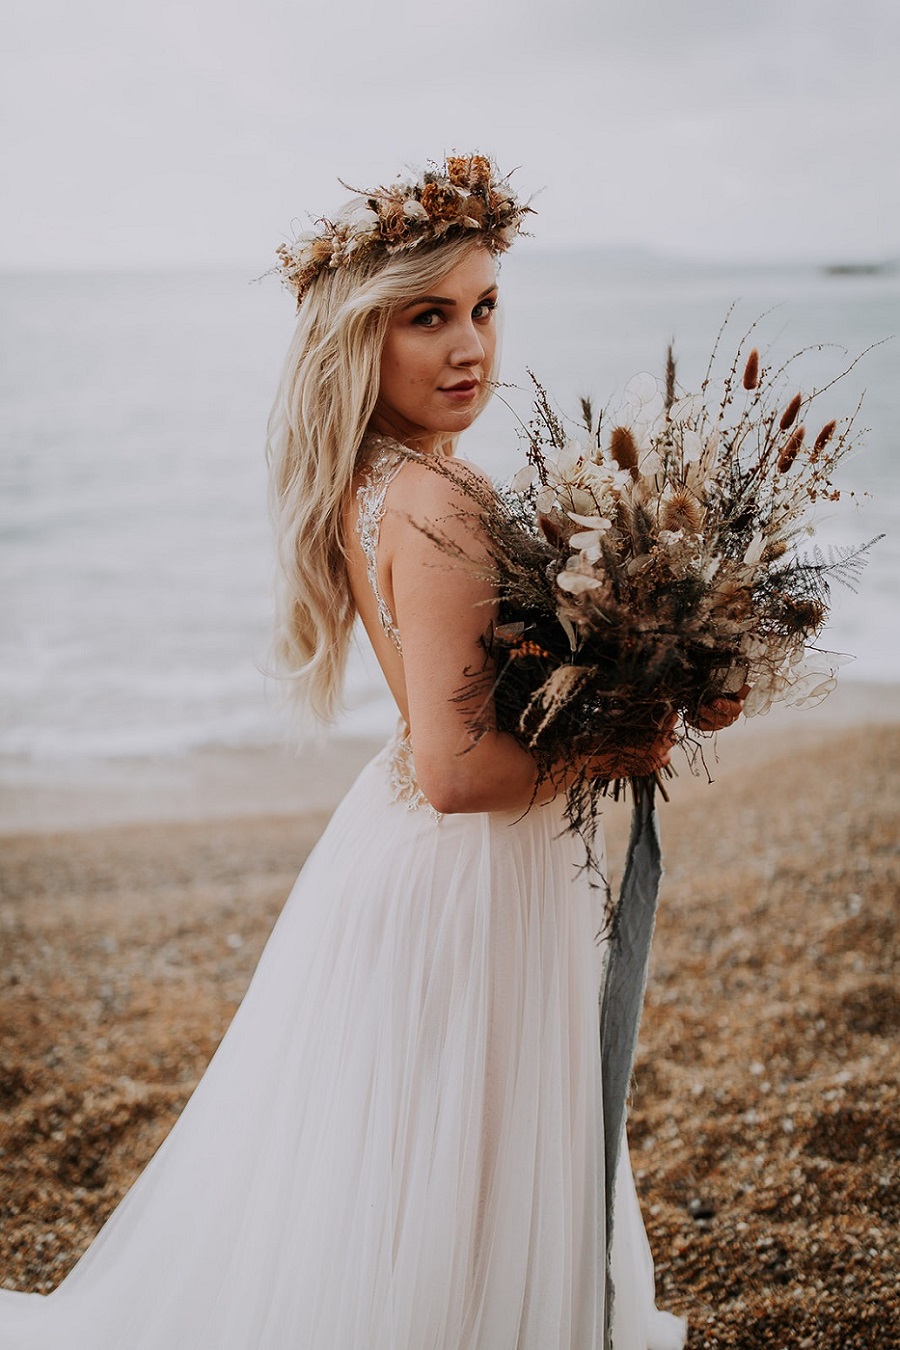 Sunrise elopement shoot! Westlake Photography and the Rustic Dresser (9)